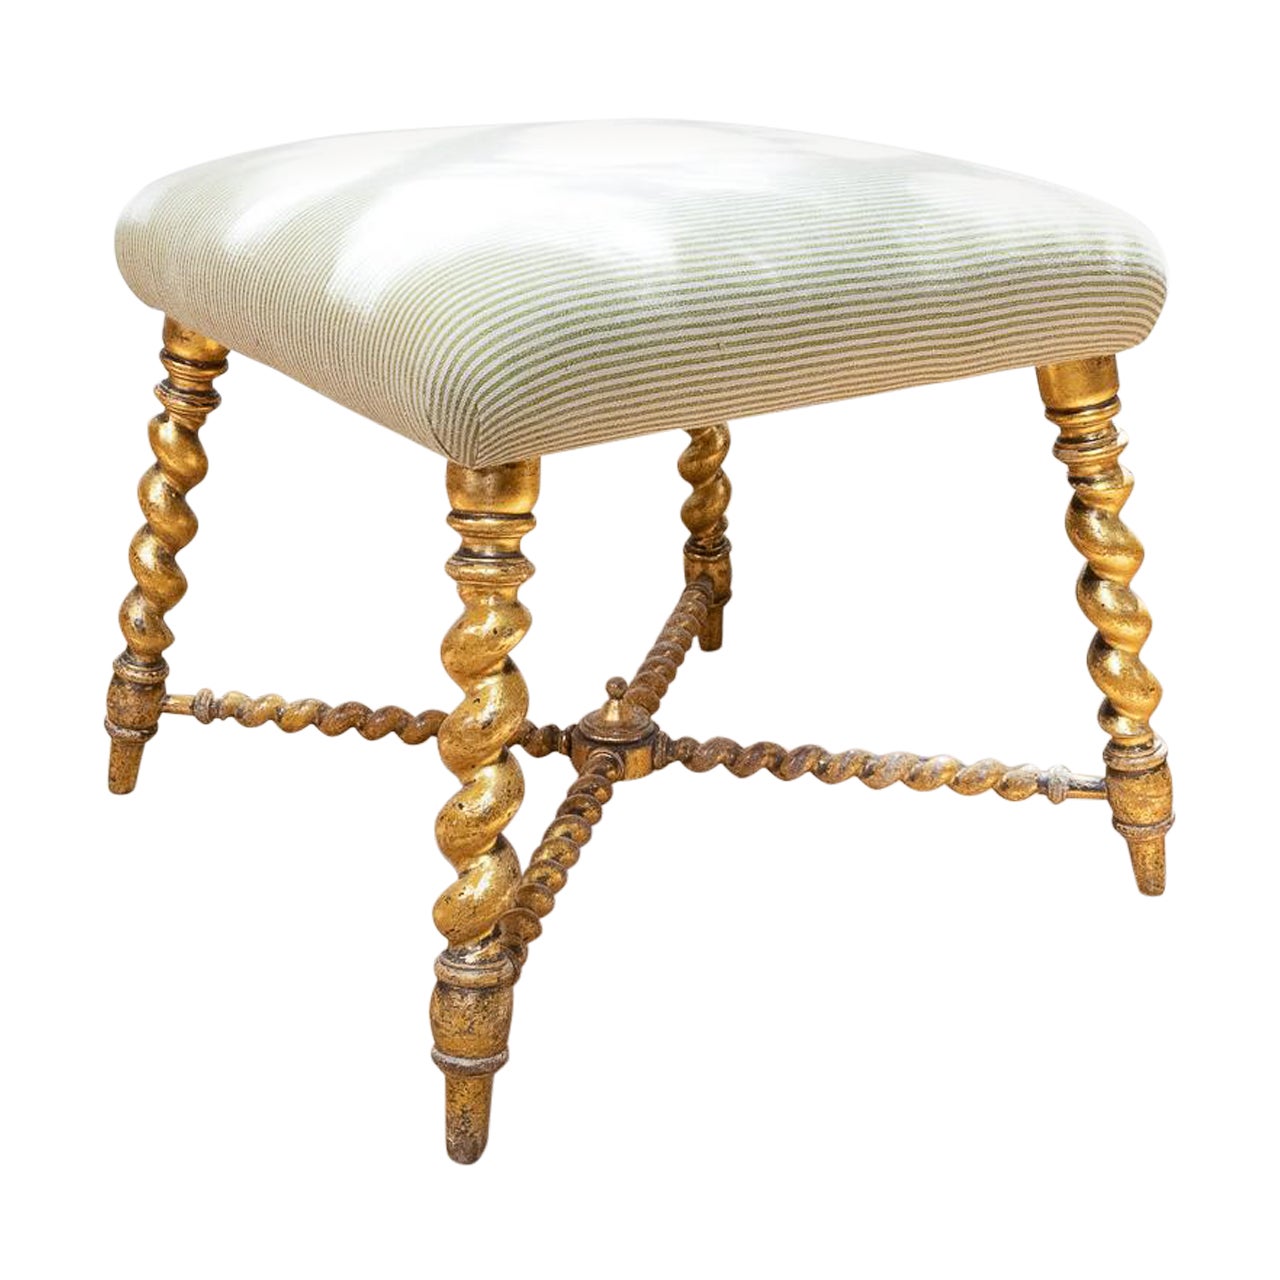 19th Century French Napoleon III Square Giltwood Barley Twist Footstool Ottoman For Sale